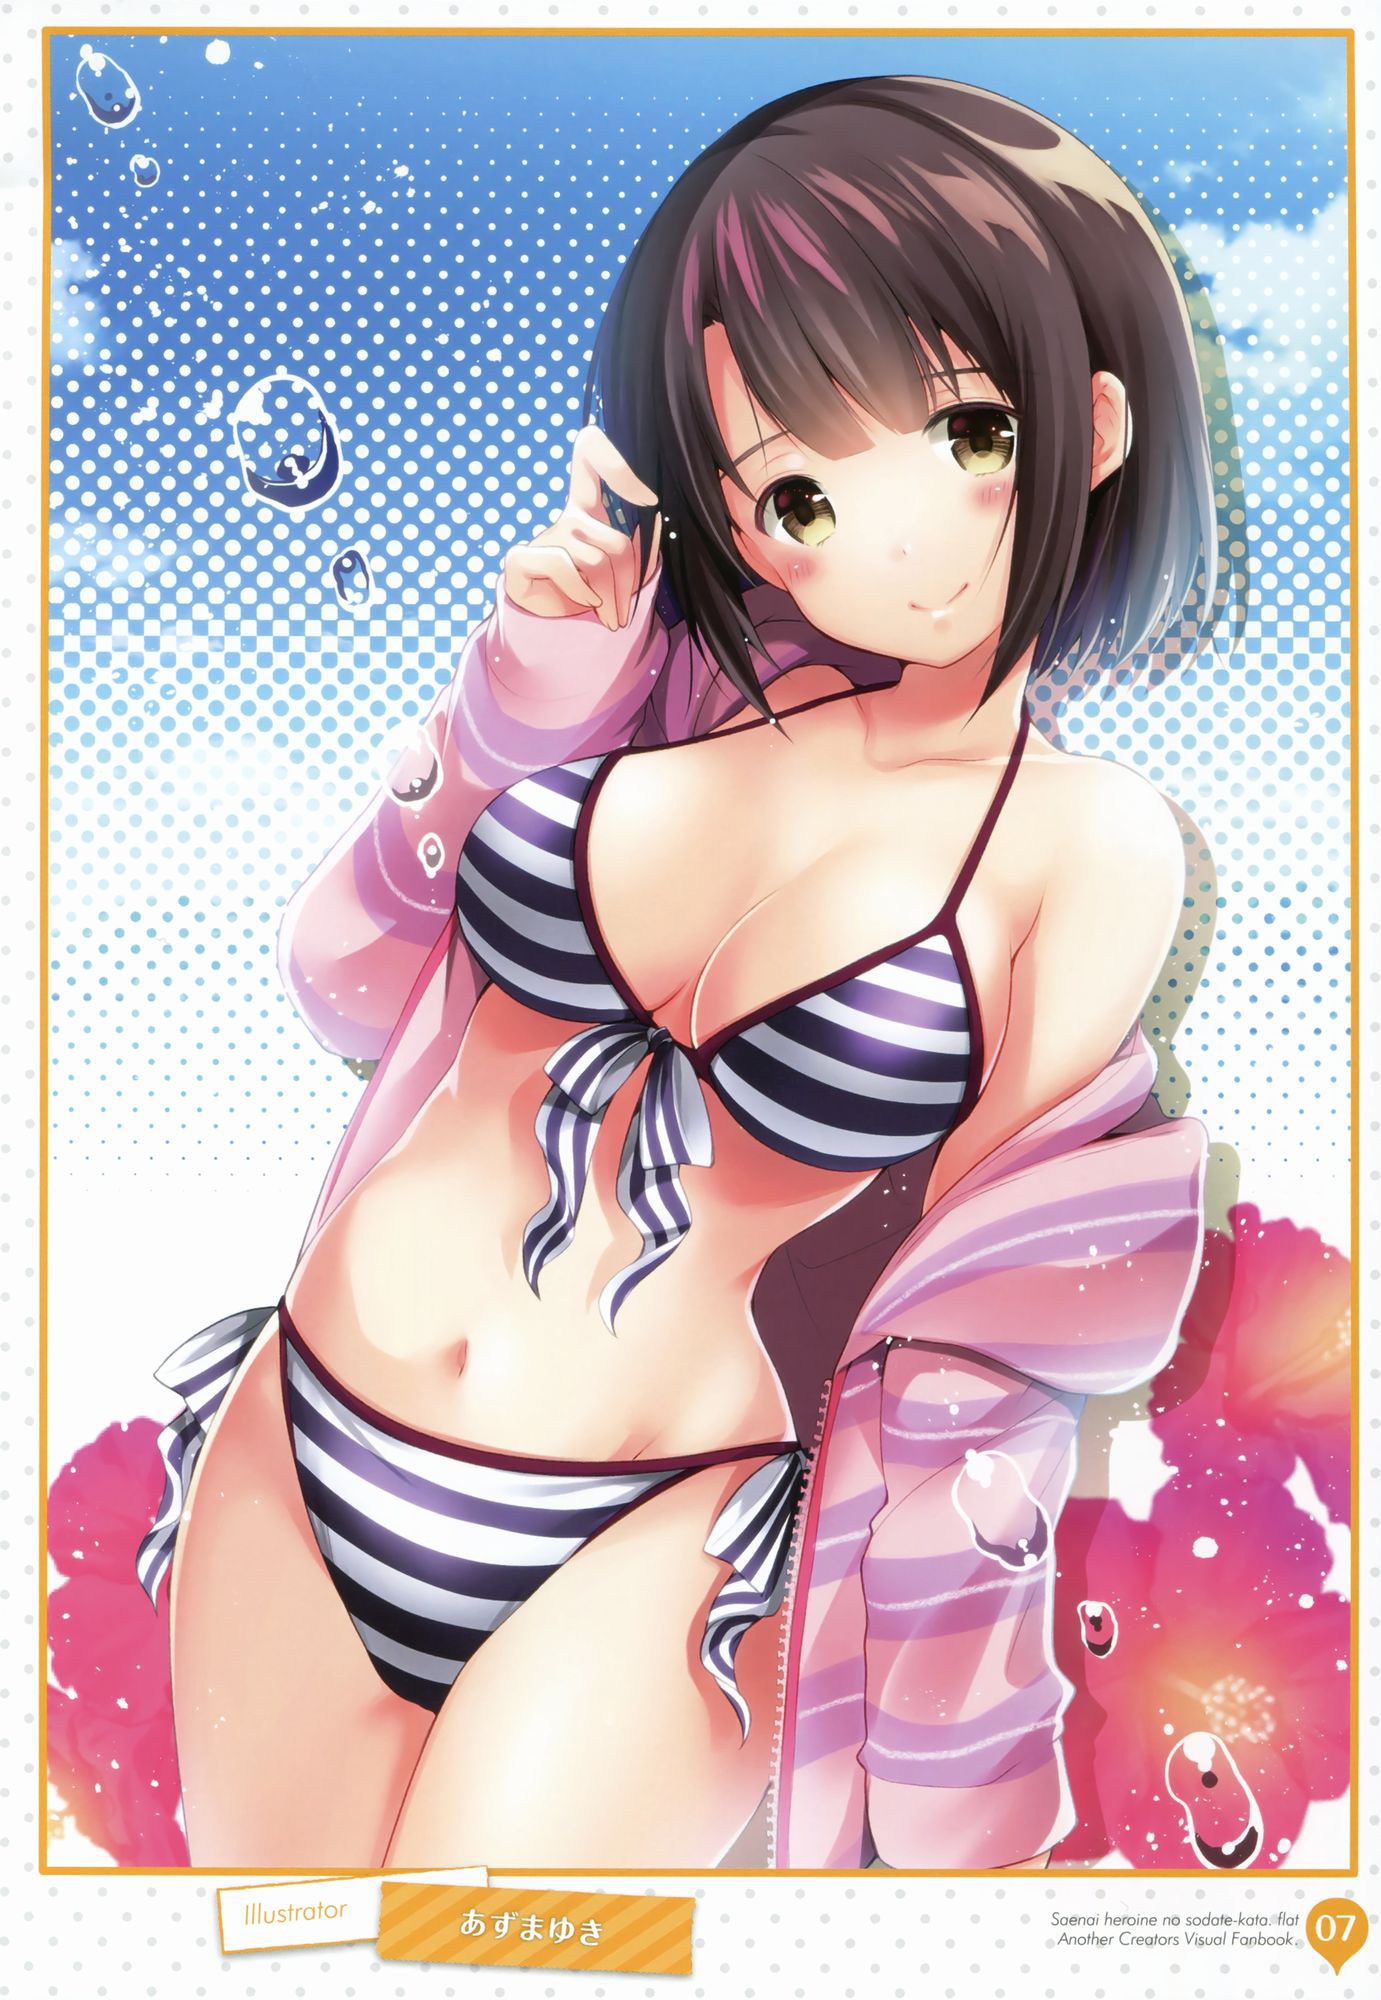 [Secondary ZIP] rainbow image of cute striped bread girl 41